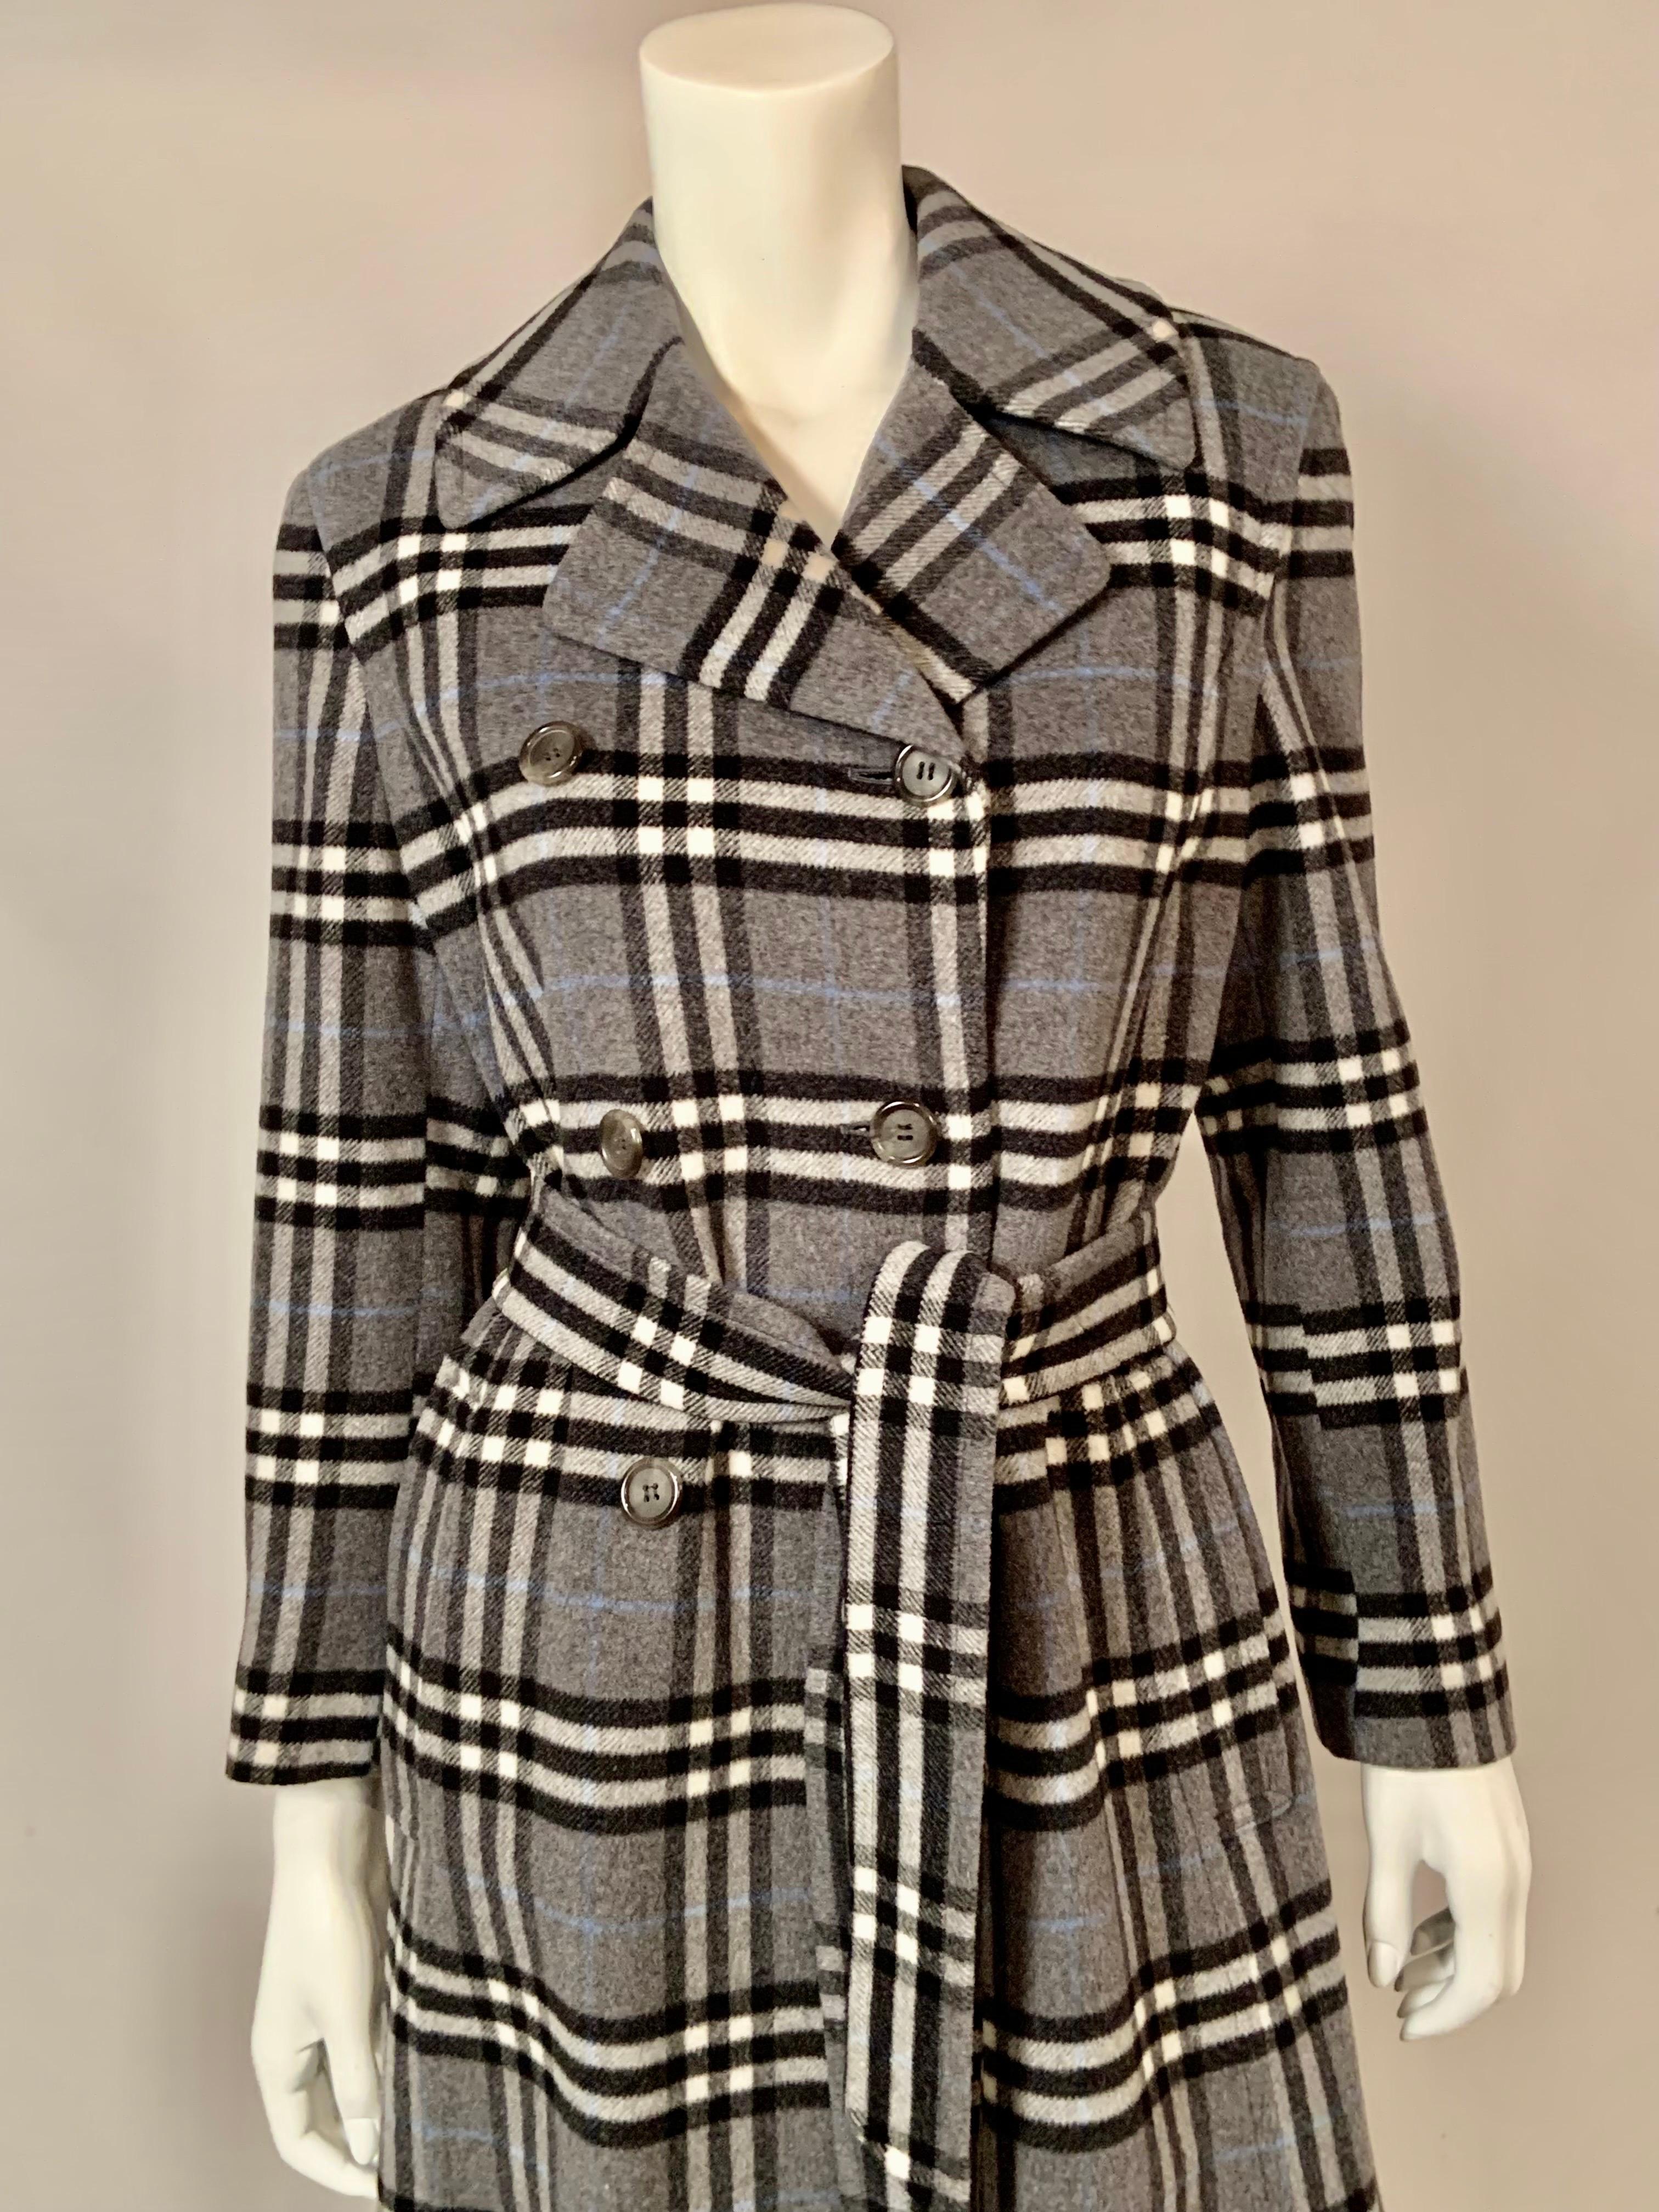 Burberry Plaid Cashmere and Wool Blend Coat and Belt In Excellent Condition For Sale In New Hope, PA